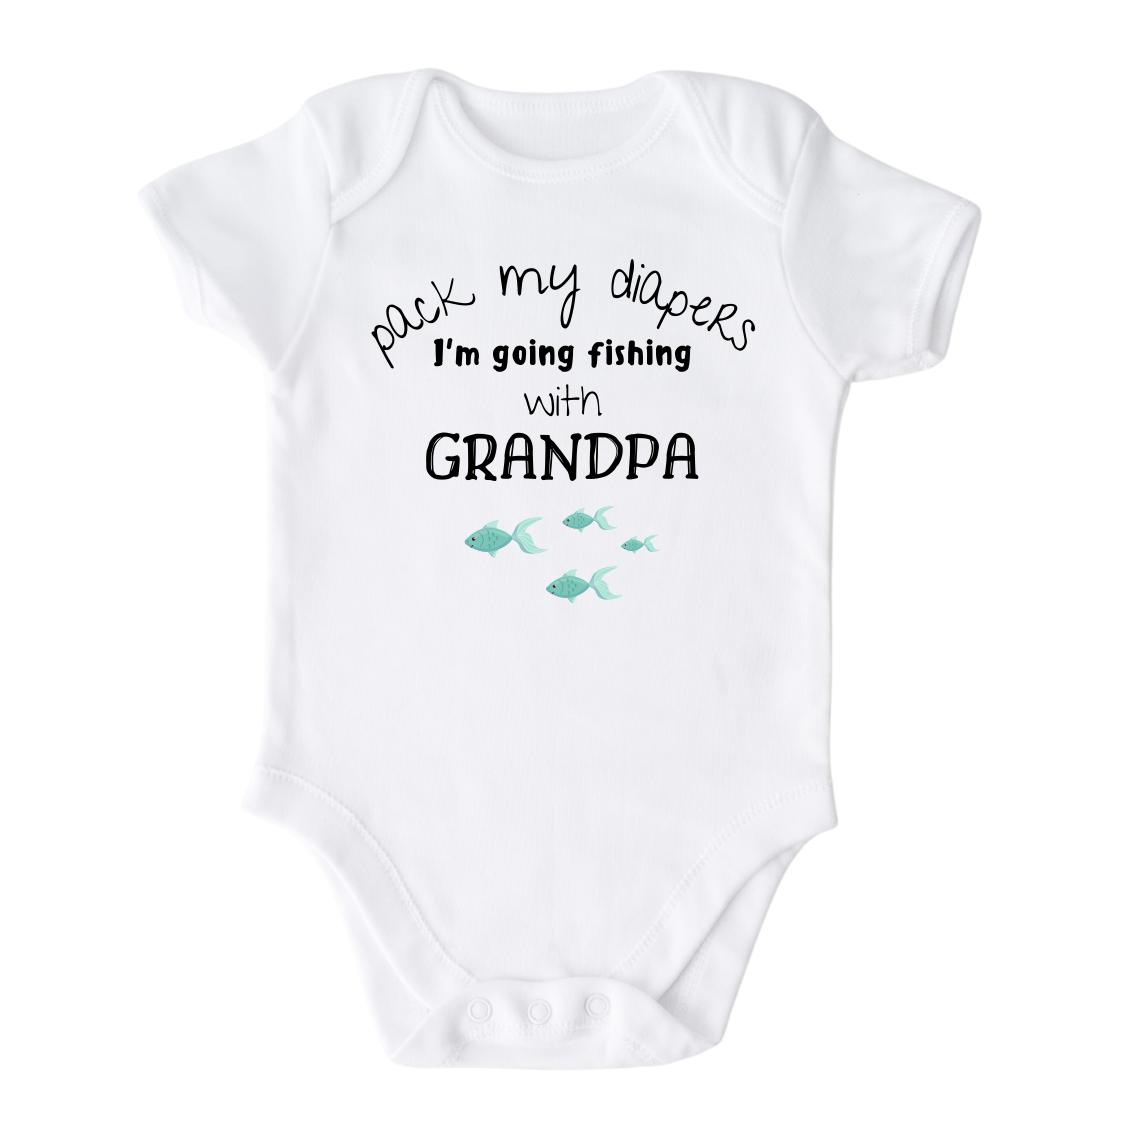 Baby Onesie A kid's t-shirt featuring a cute printed graphic of fish and the text 'Pack My Diapers I'm going fishing with grandpa.' This charming t-shirt is perfect for little ones who enjoy fishing adventures with their grandpas. Made from high-quality materials, it offers comfort and durability, making it a wonderful addition to any child's wardrobe.